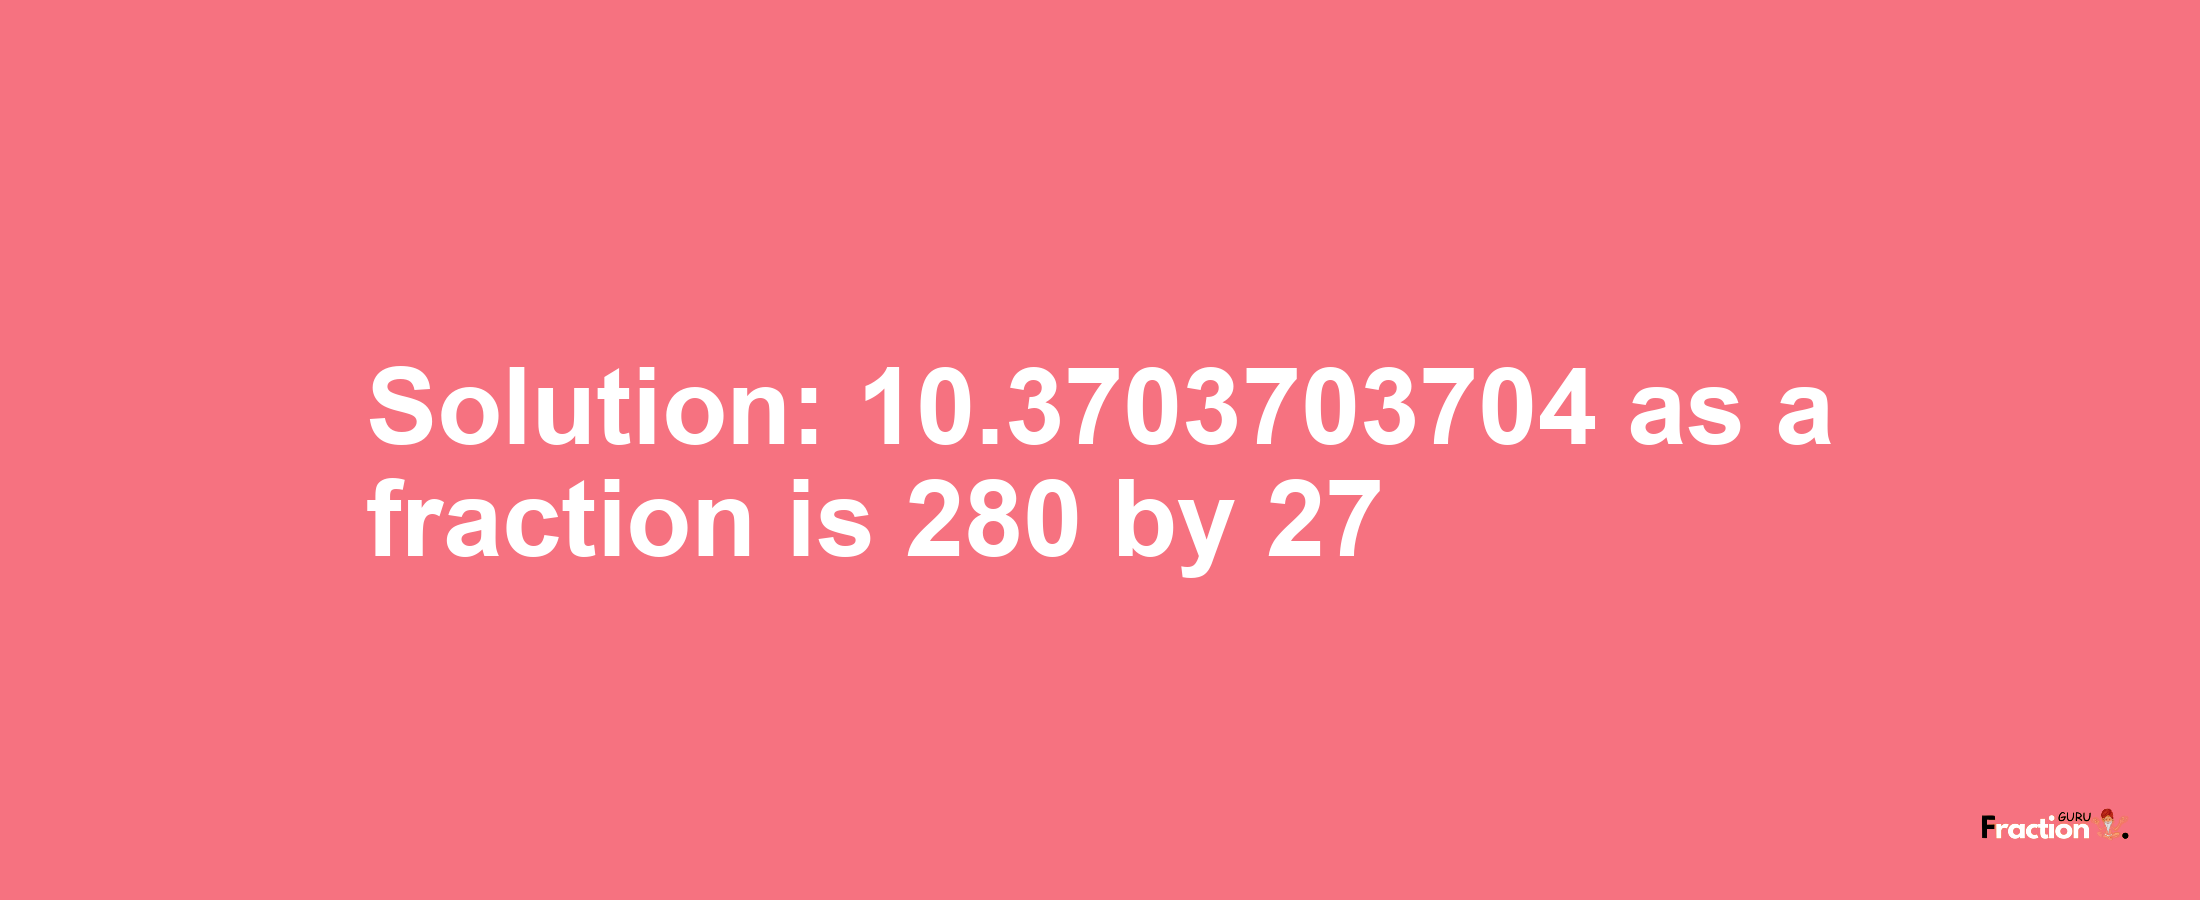 Solution:10.3703703704 as a fraction is 280/27